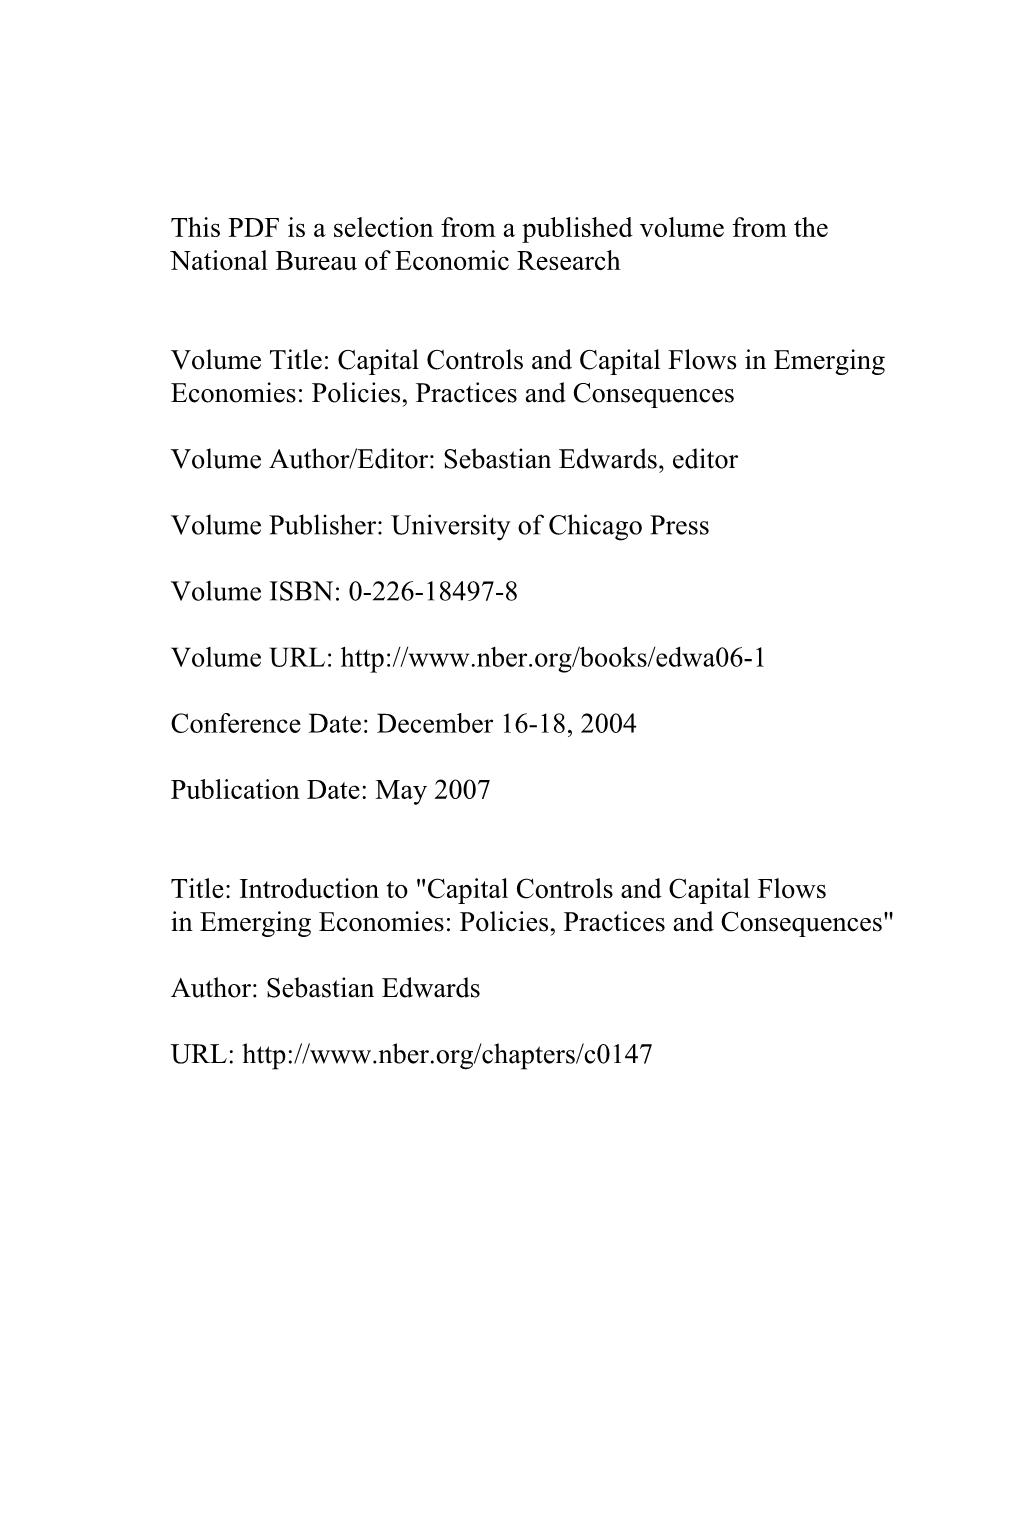 Capital Controls and Capital Flows in Emerging Economies: Policies, Practices and Consequences